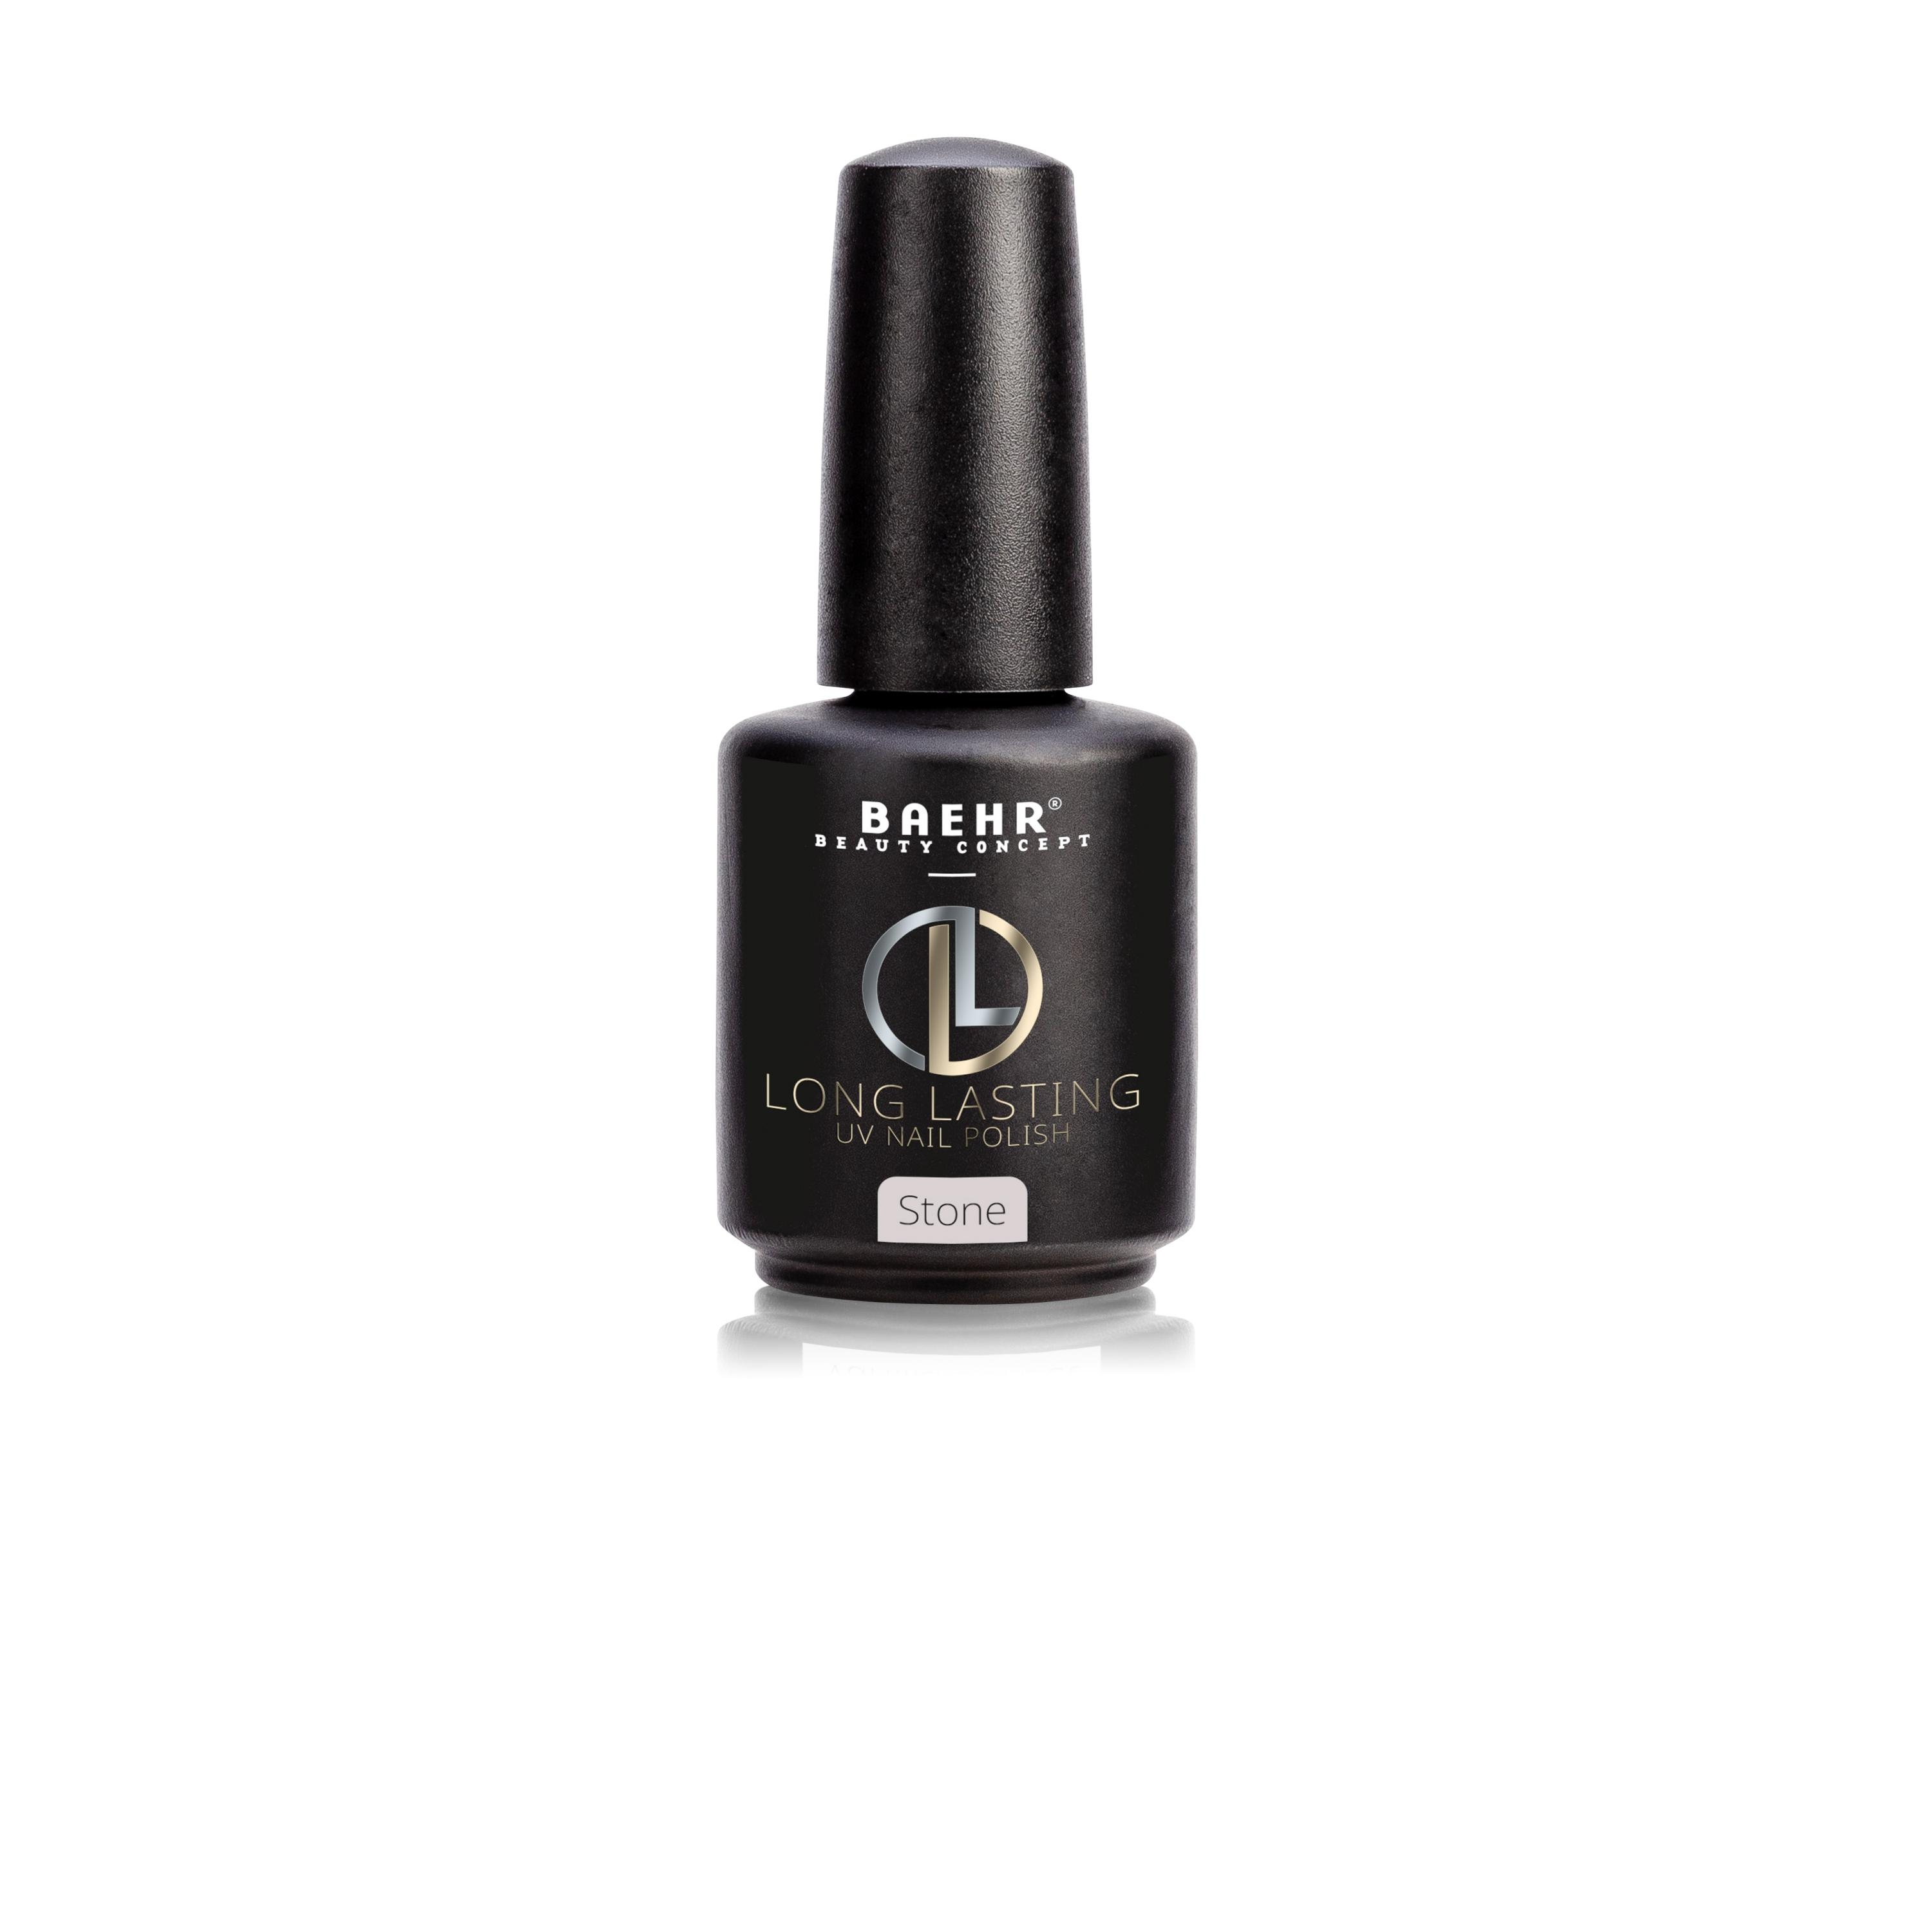 BAEHR BEAUTY CONCEPT - NAILS Long-Lasting Stone 12 ml